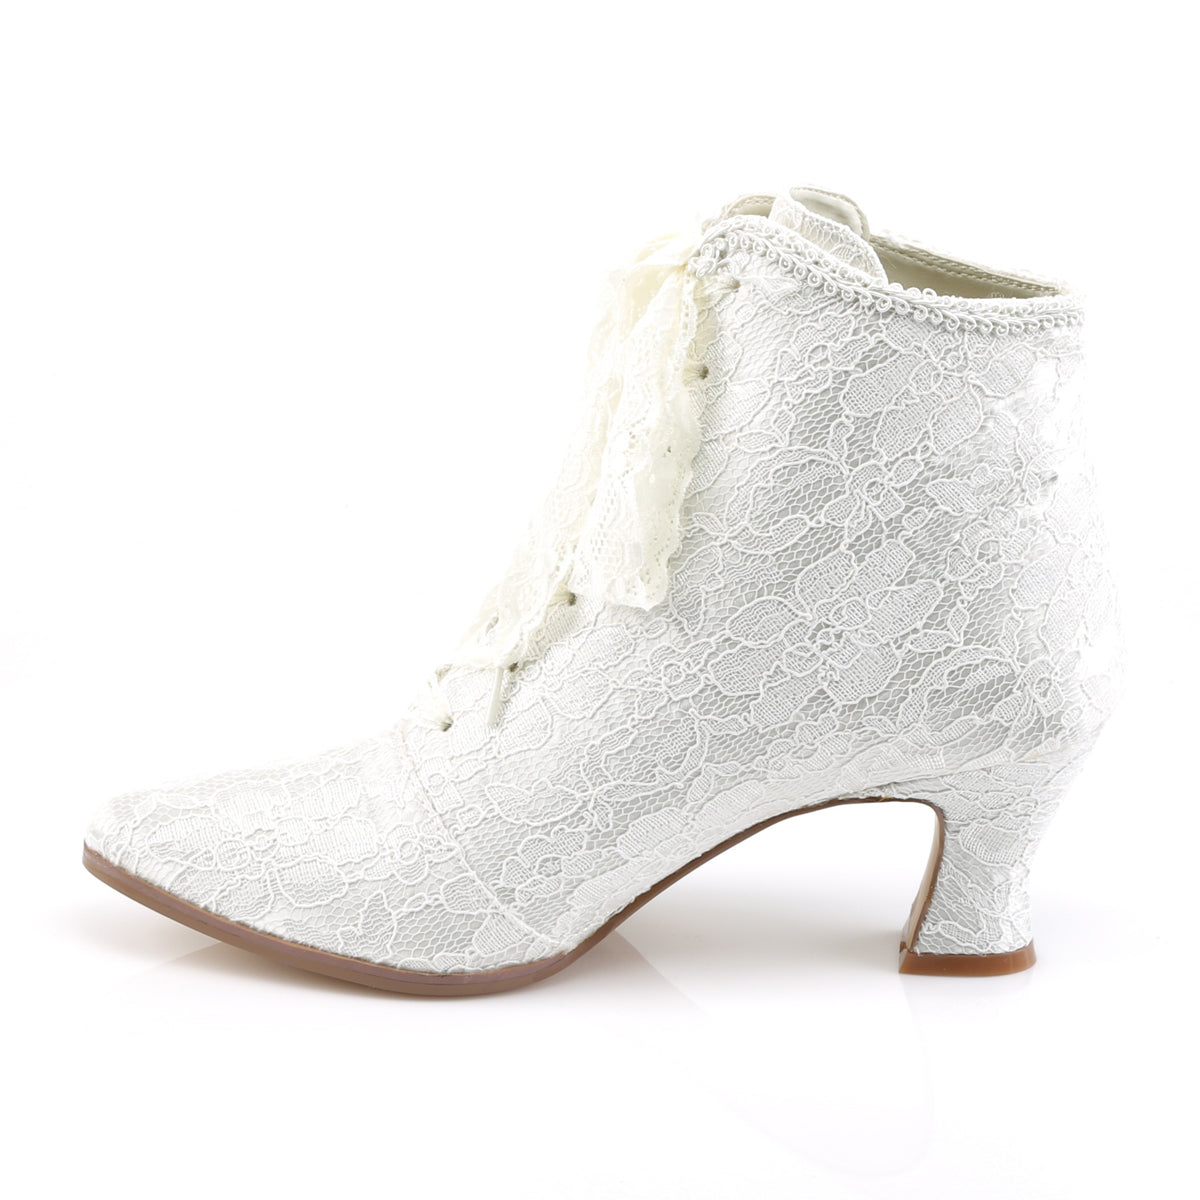 VICTORIAN-30 Fabulicious 3 Inch Heel Ivory Lace Satin Boots – Pole ...